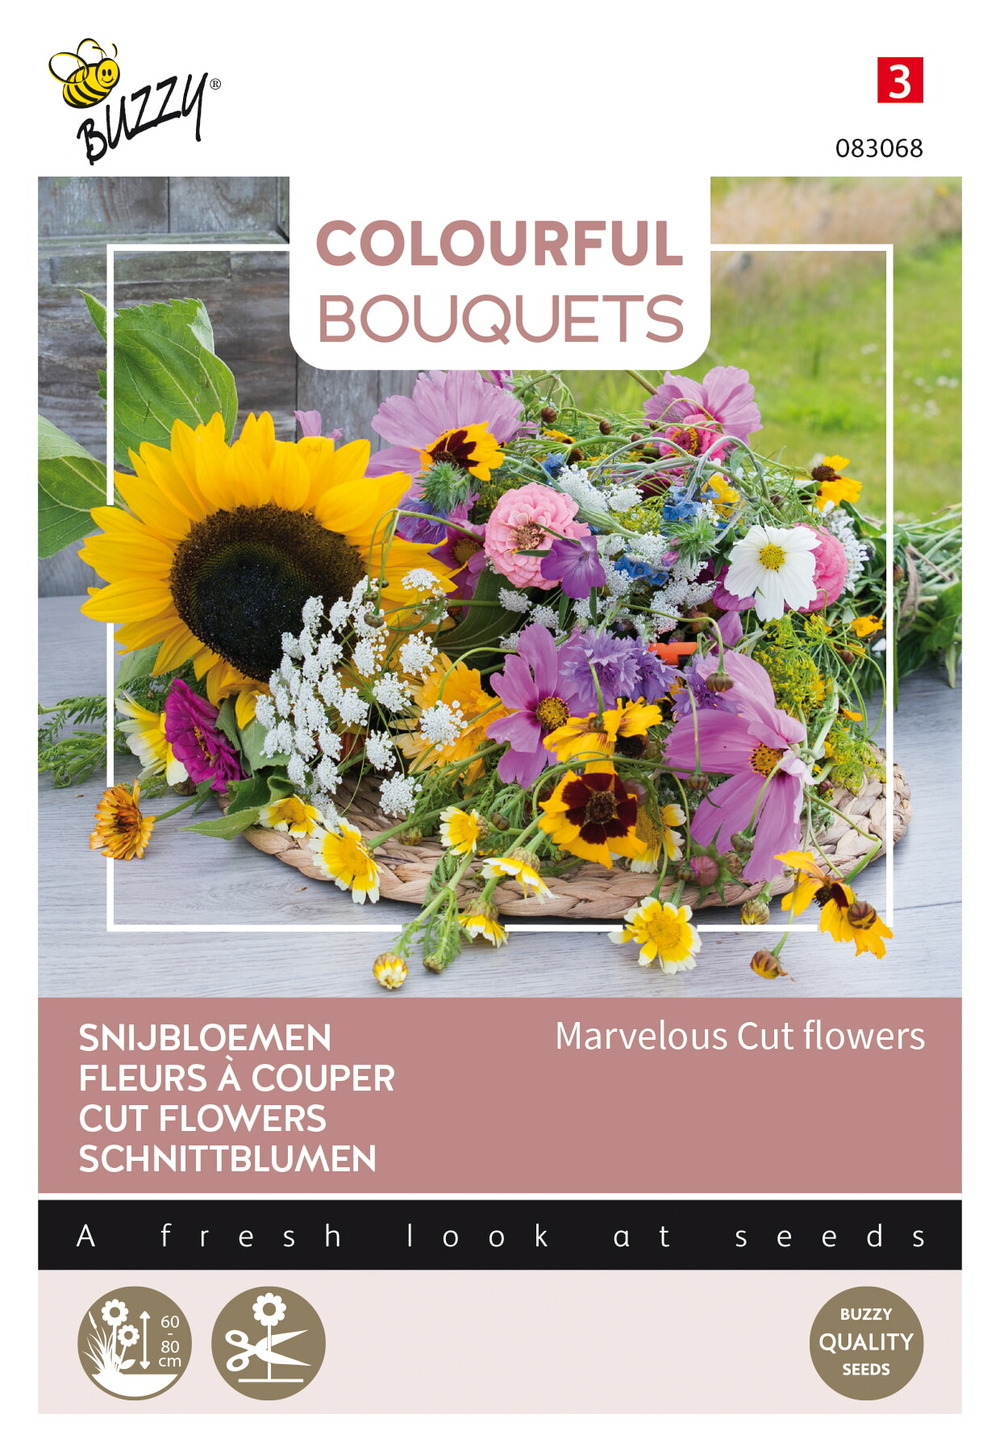 Buzzy colourful bouquets, marvelous cutflowers - ca. 5 gr